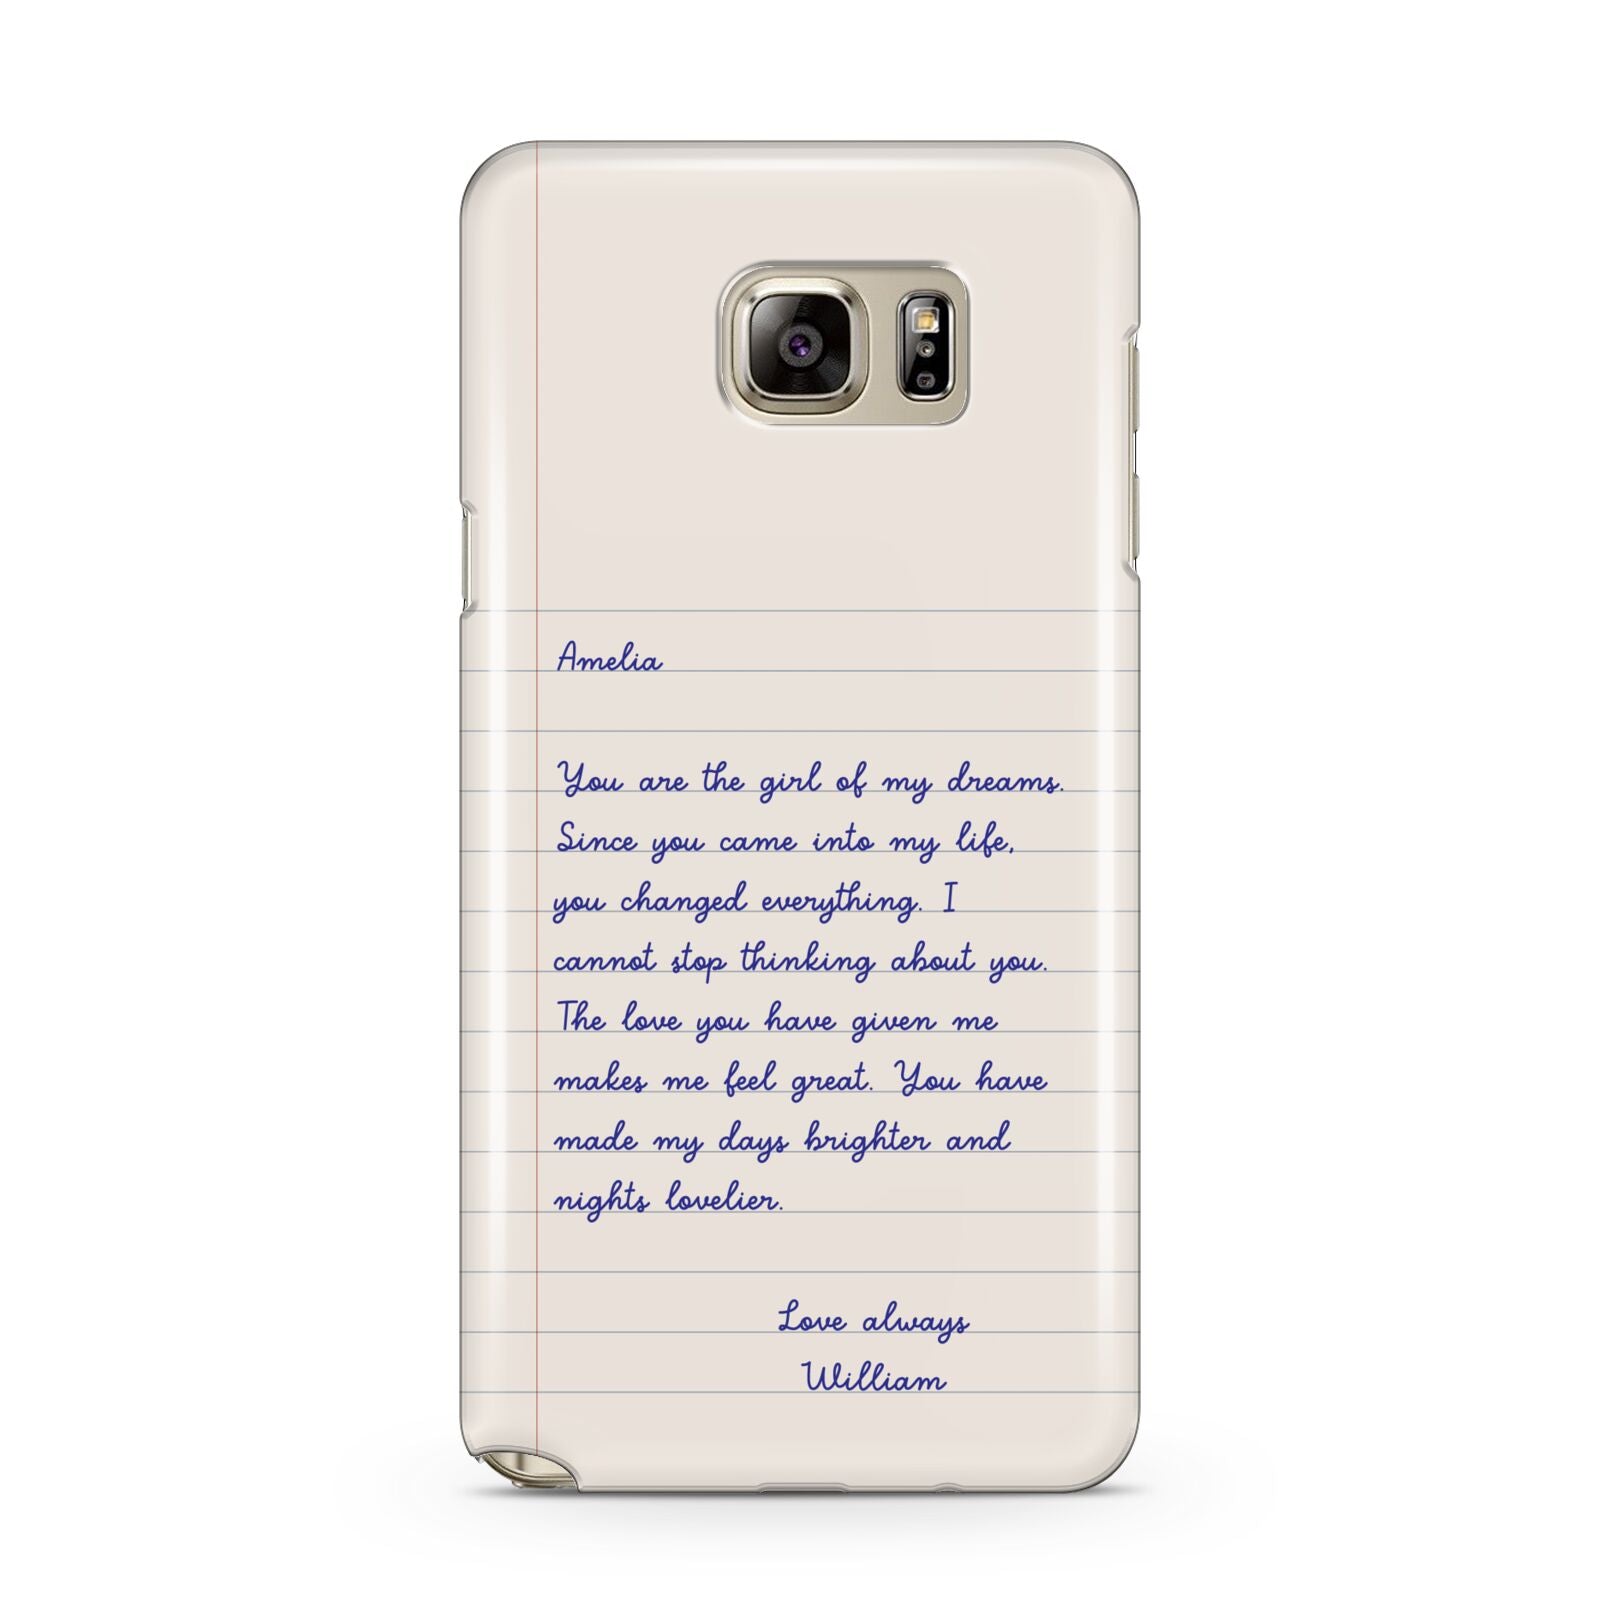 Personalised Love Letter Samsung Galaxy Note 5 Case